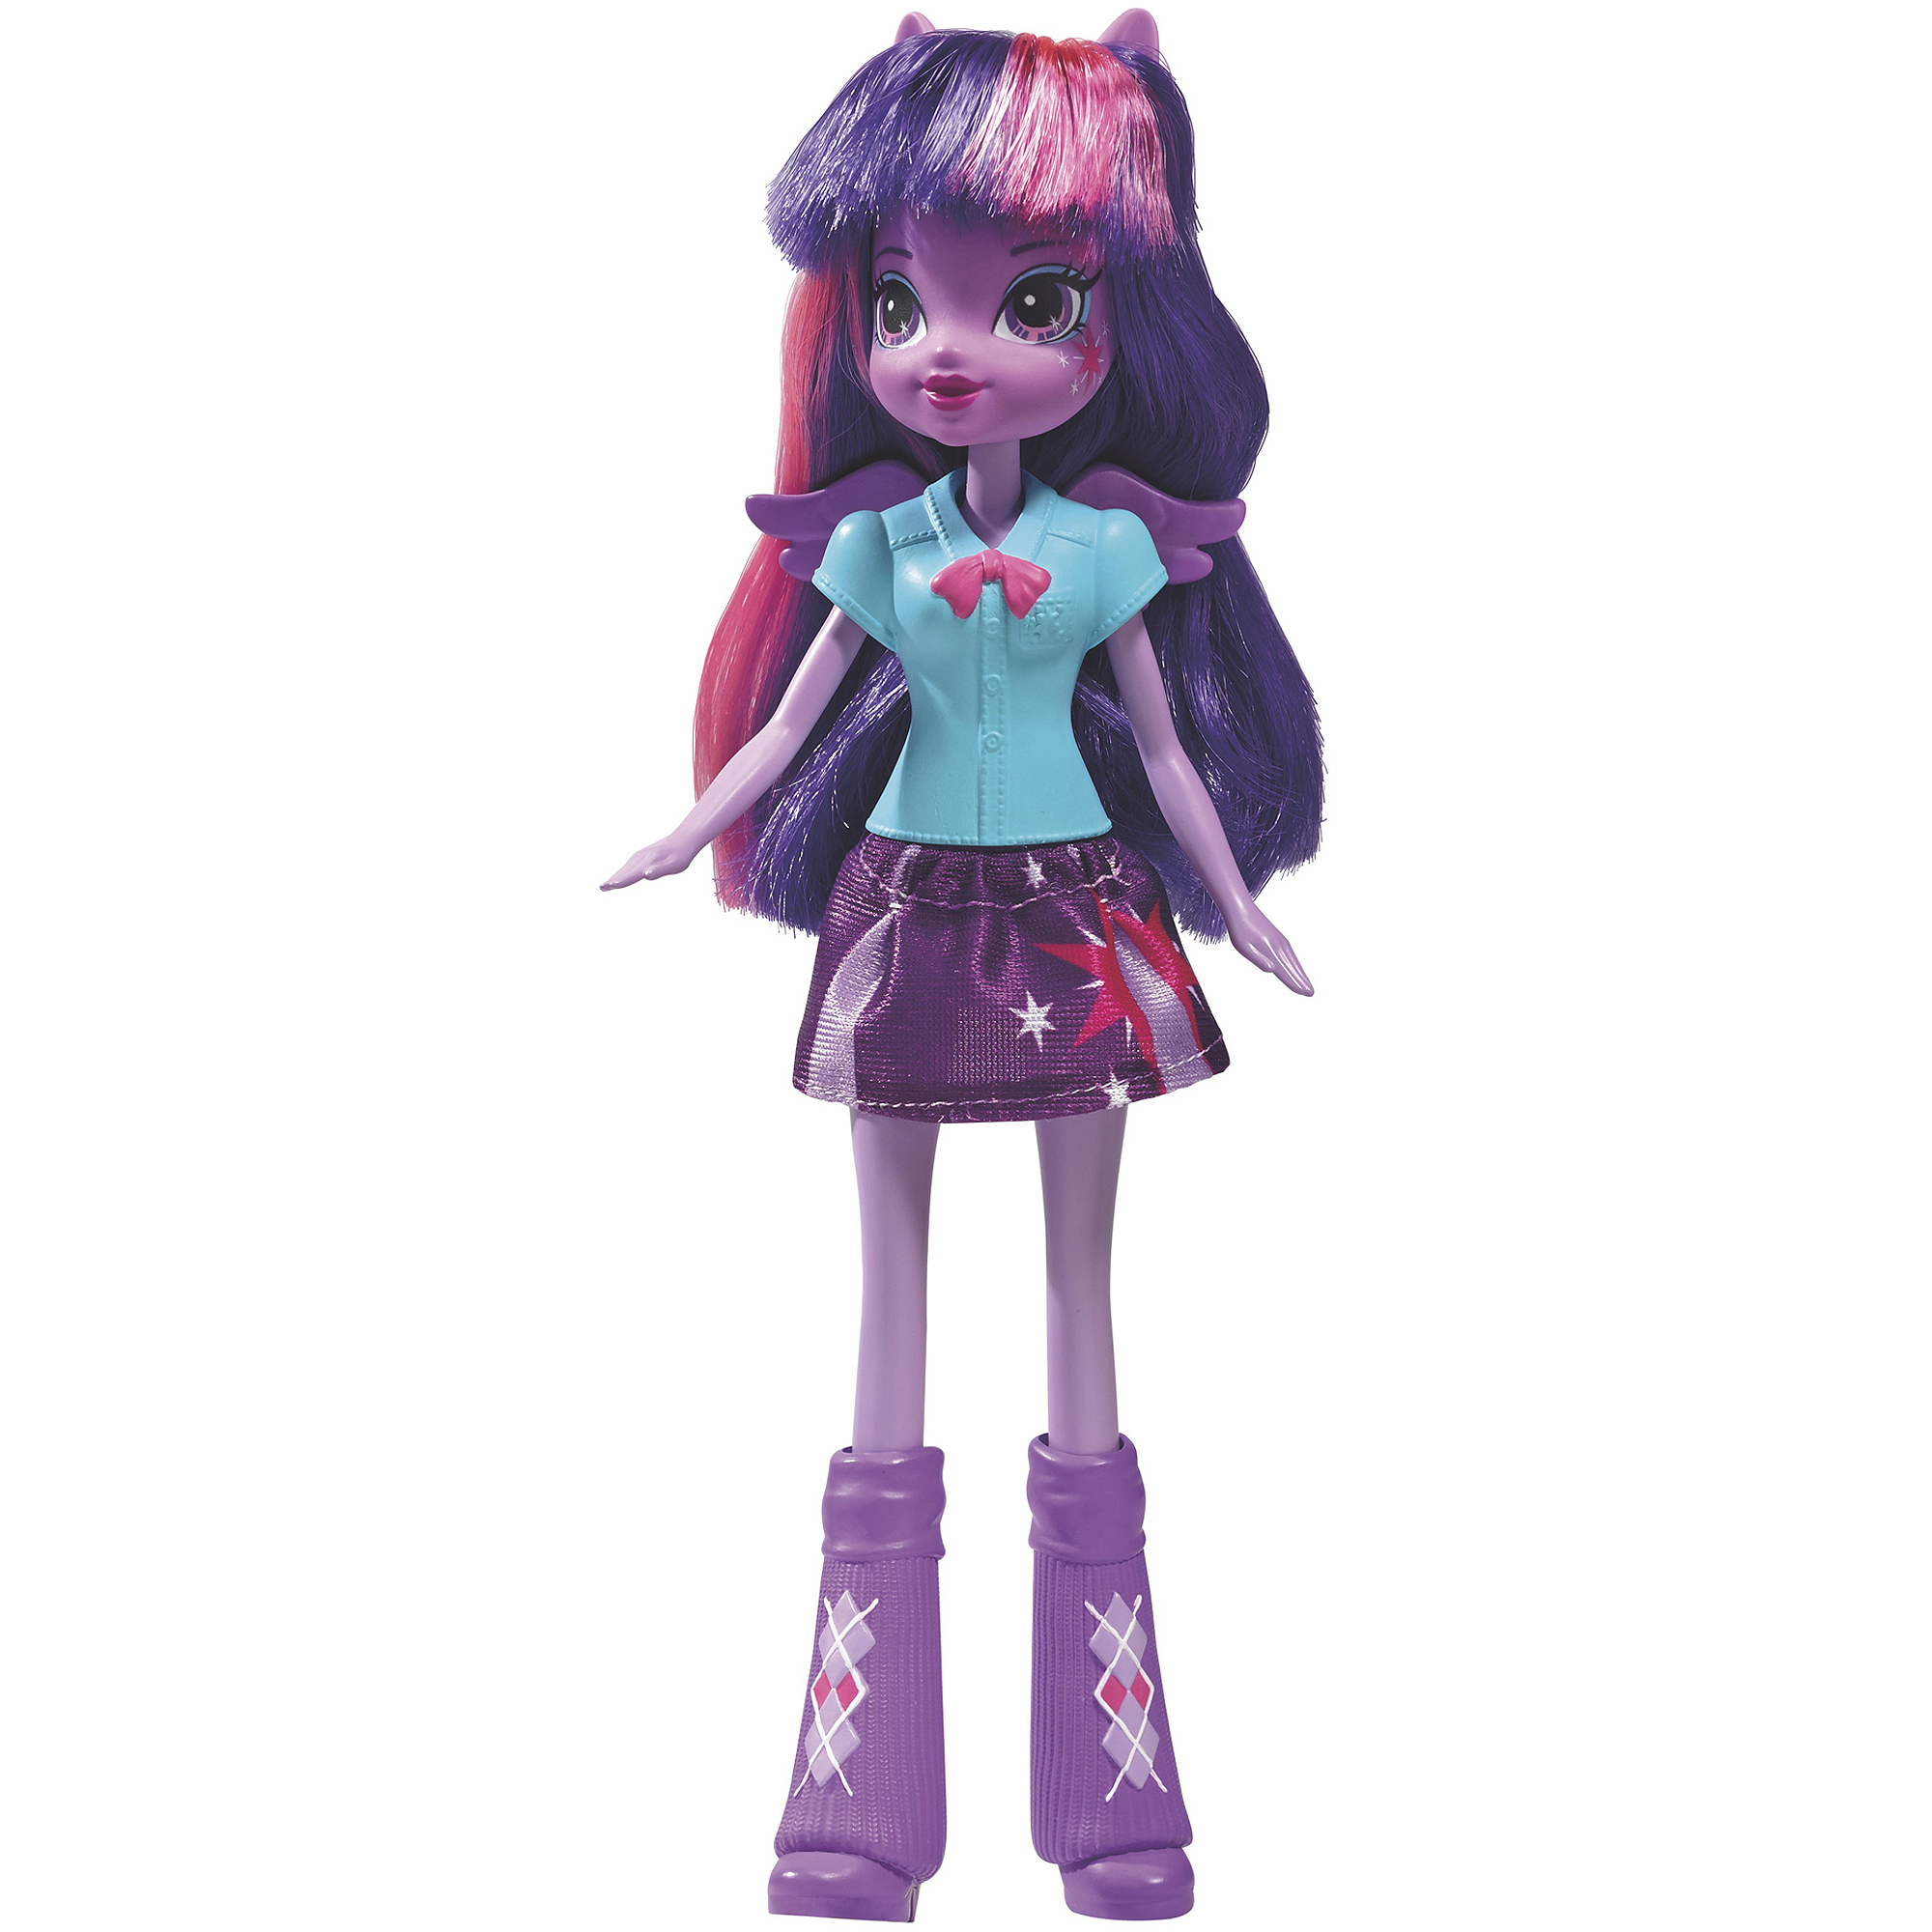 My Little Pony Equestria Girls Collection Twilight Sparkle Doll - image 4 of 10